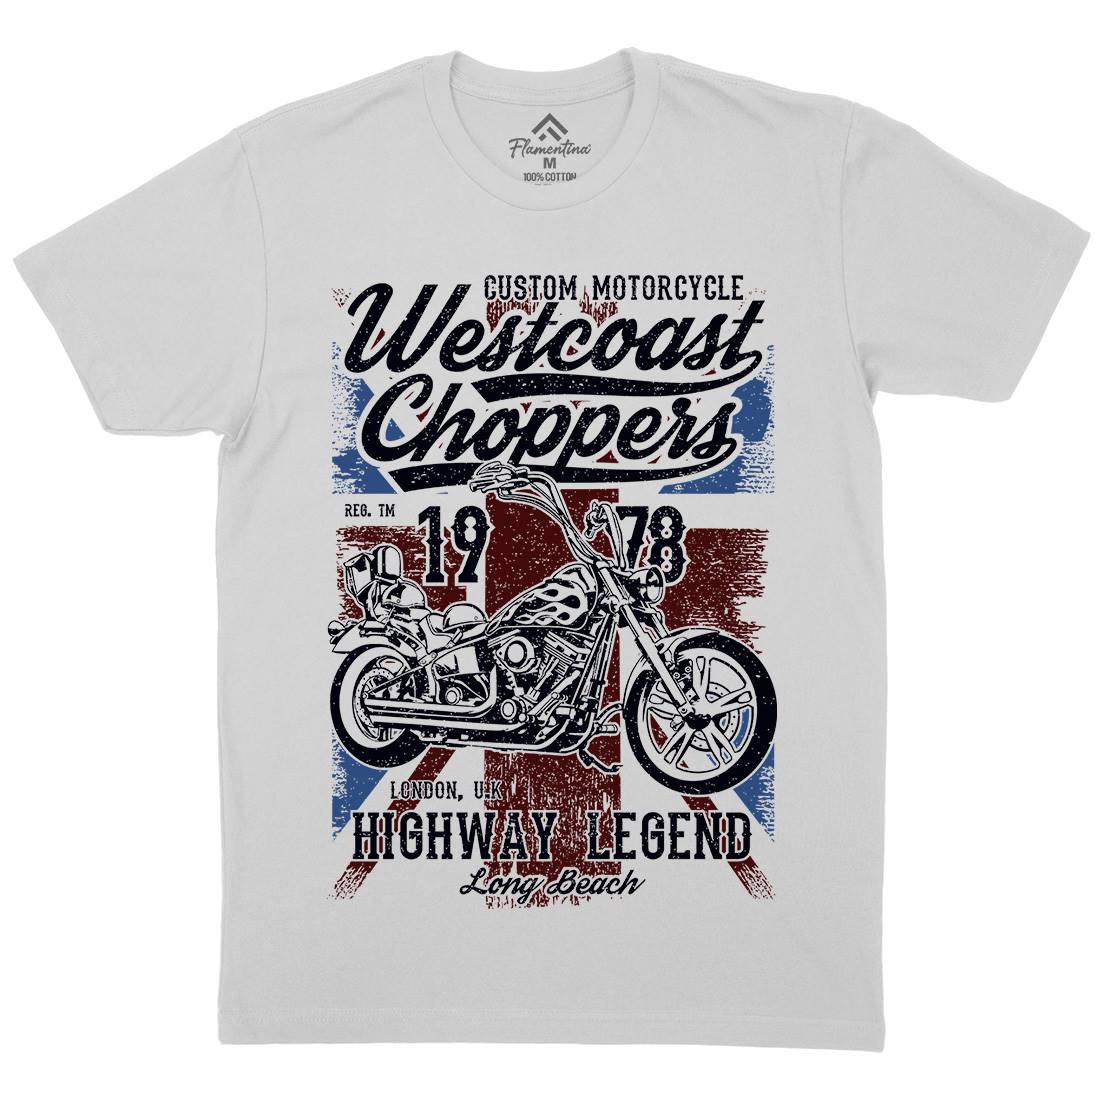 Westcoast Choppers Mens Crew Neck T-Shirt Motorcycles A791